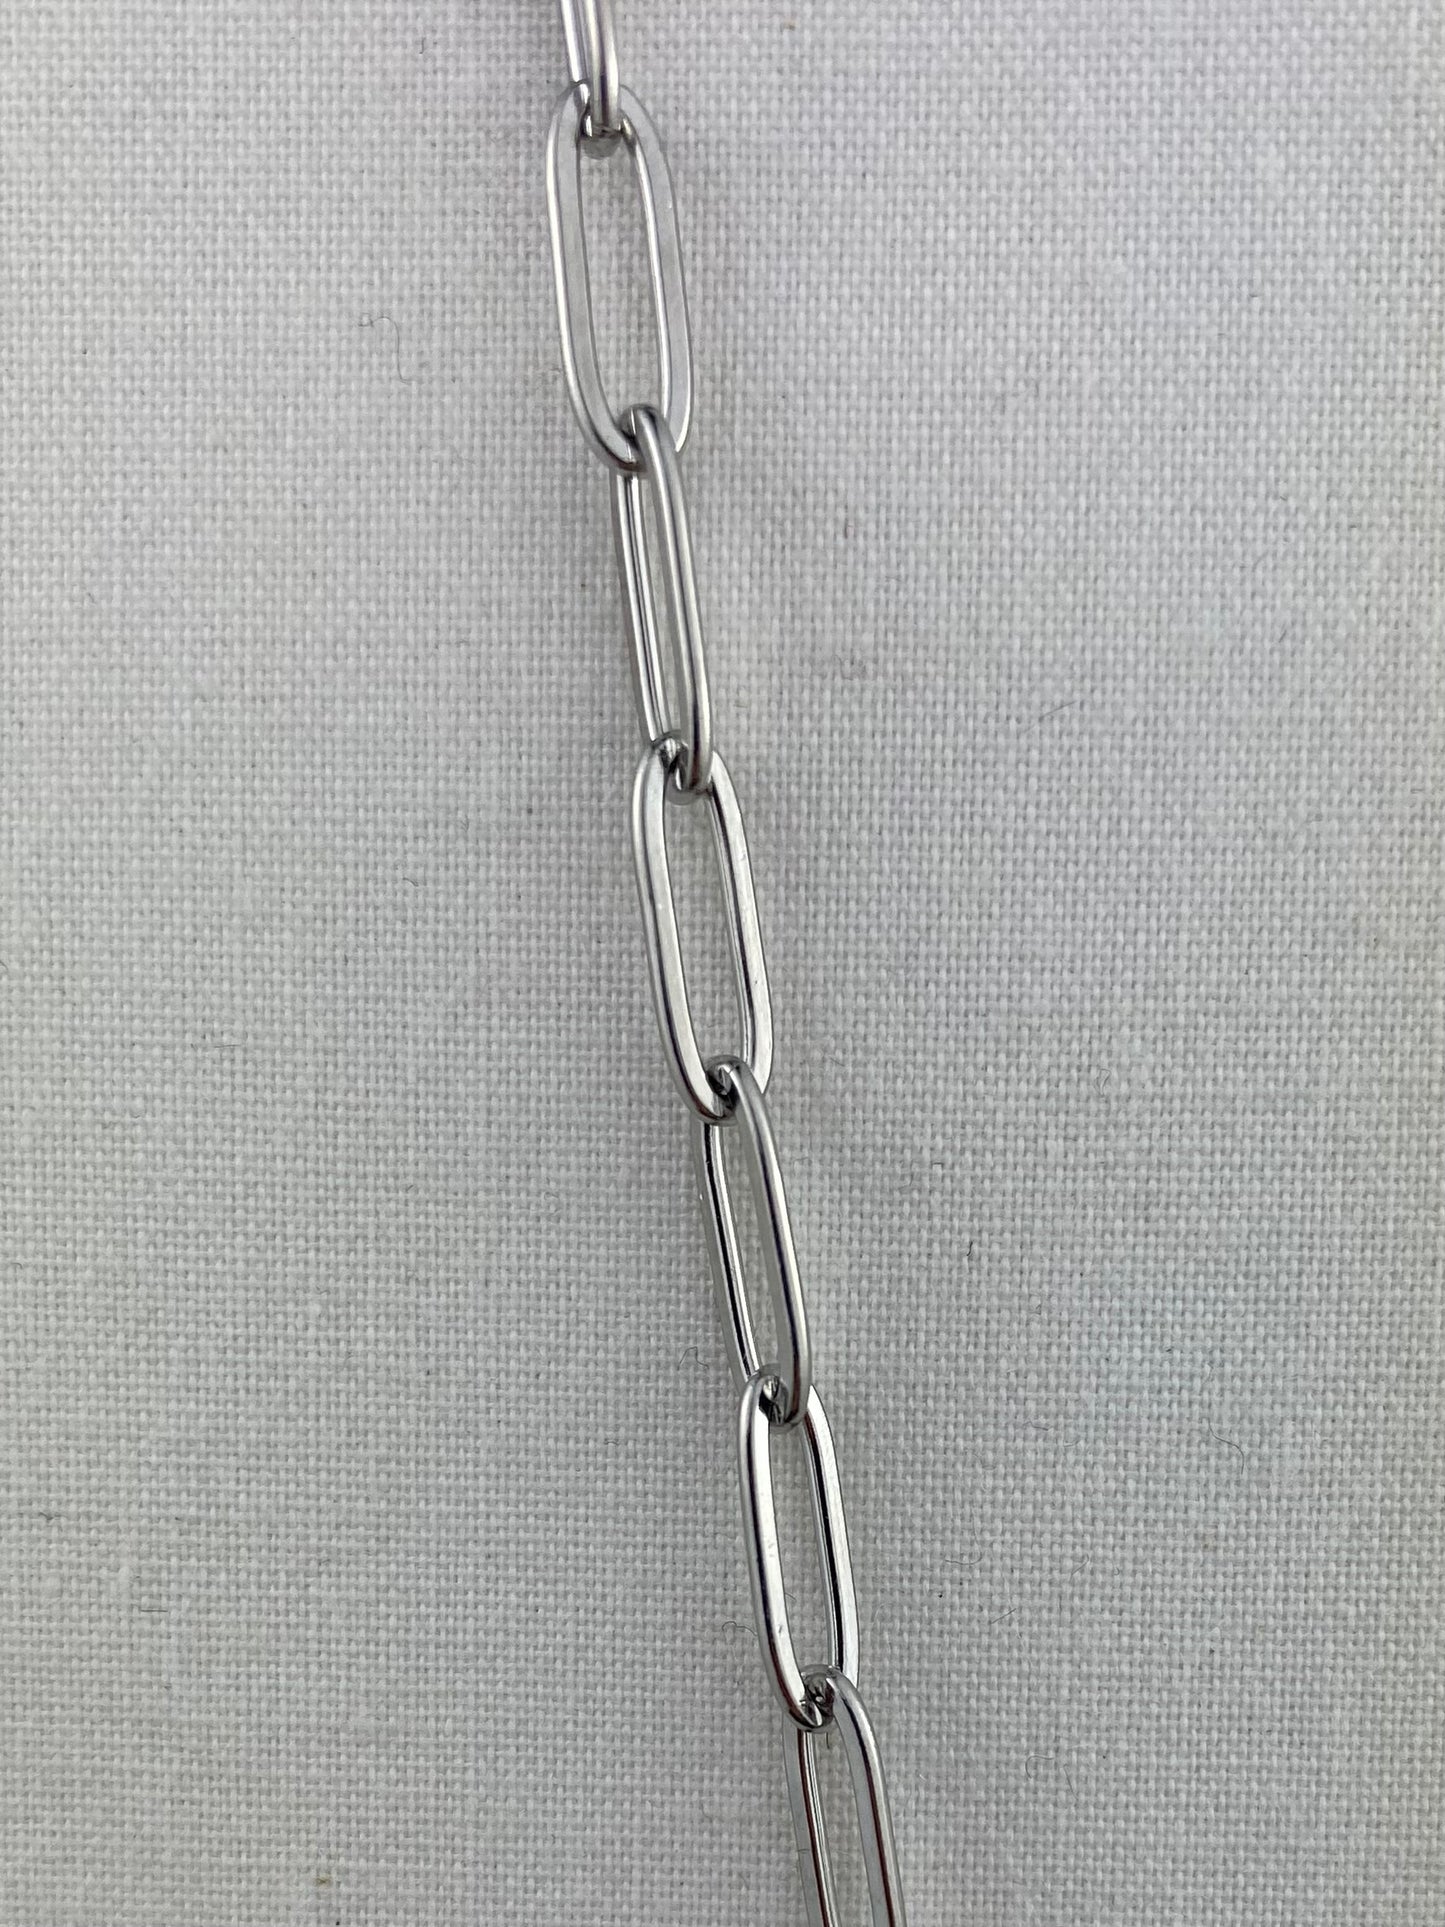 Sleek Necklace - Stainless Steel